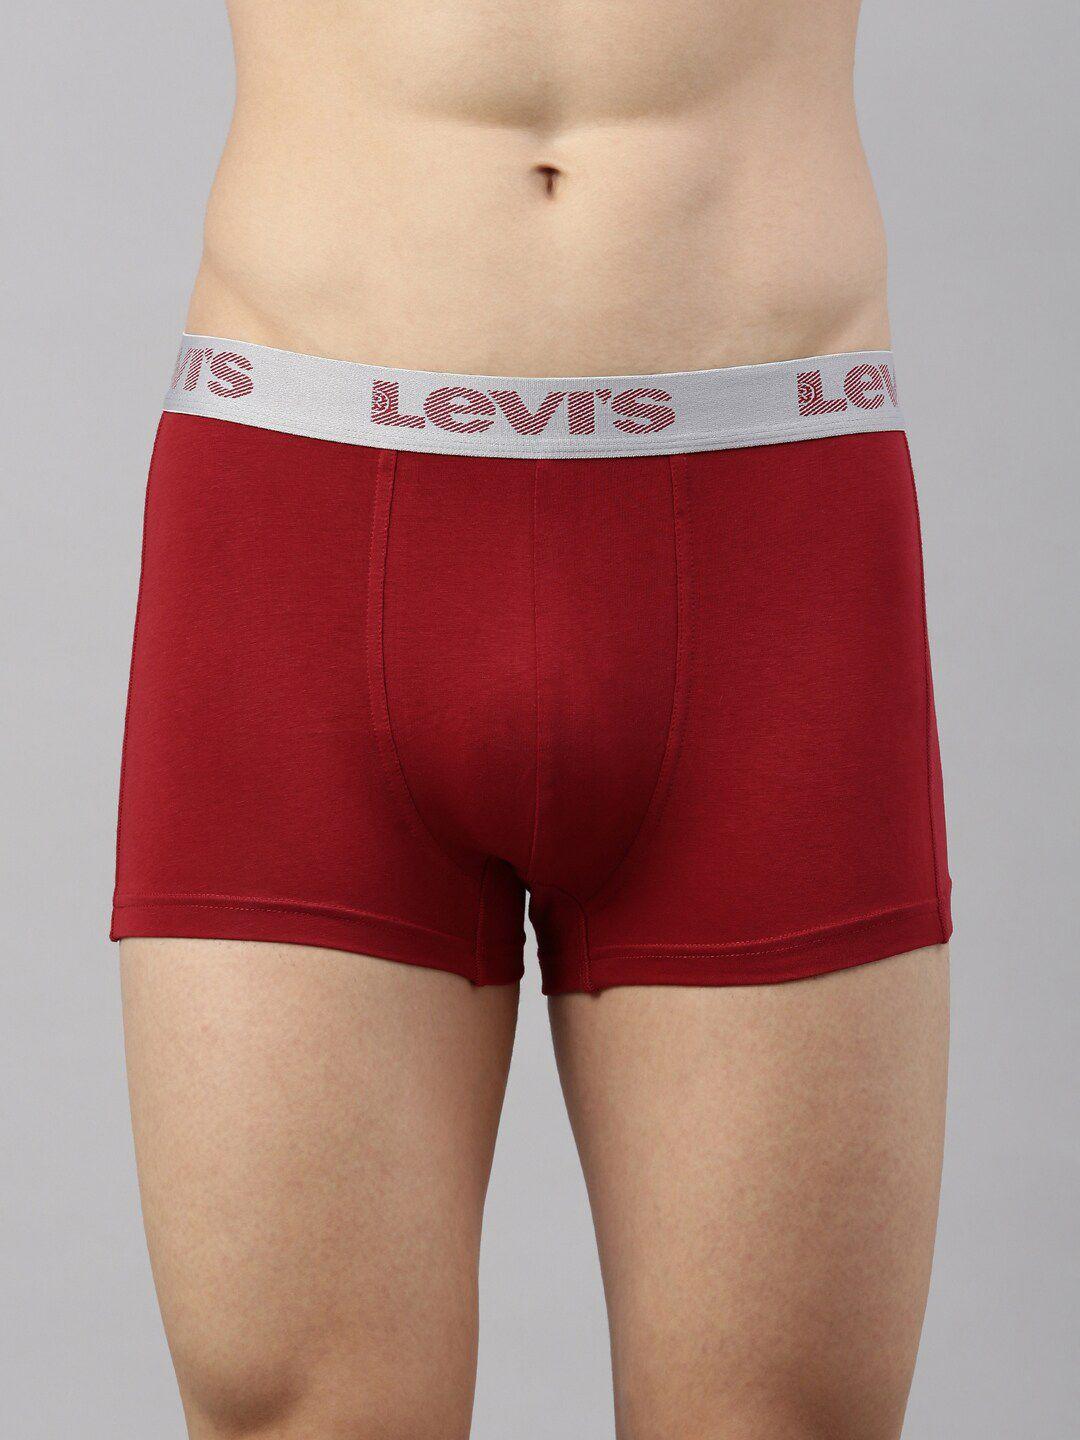 levis men smartskin technology cotton active trunks with tag free comfort-067